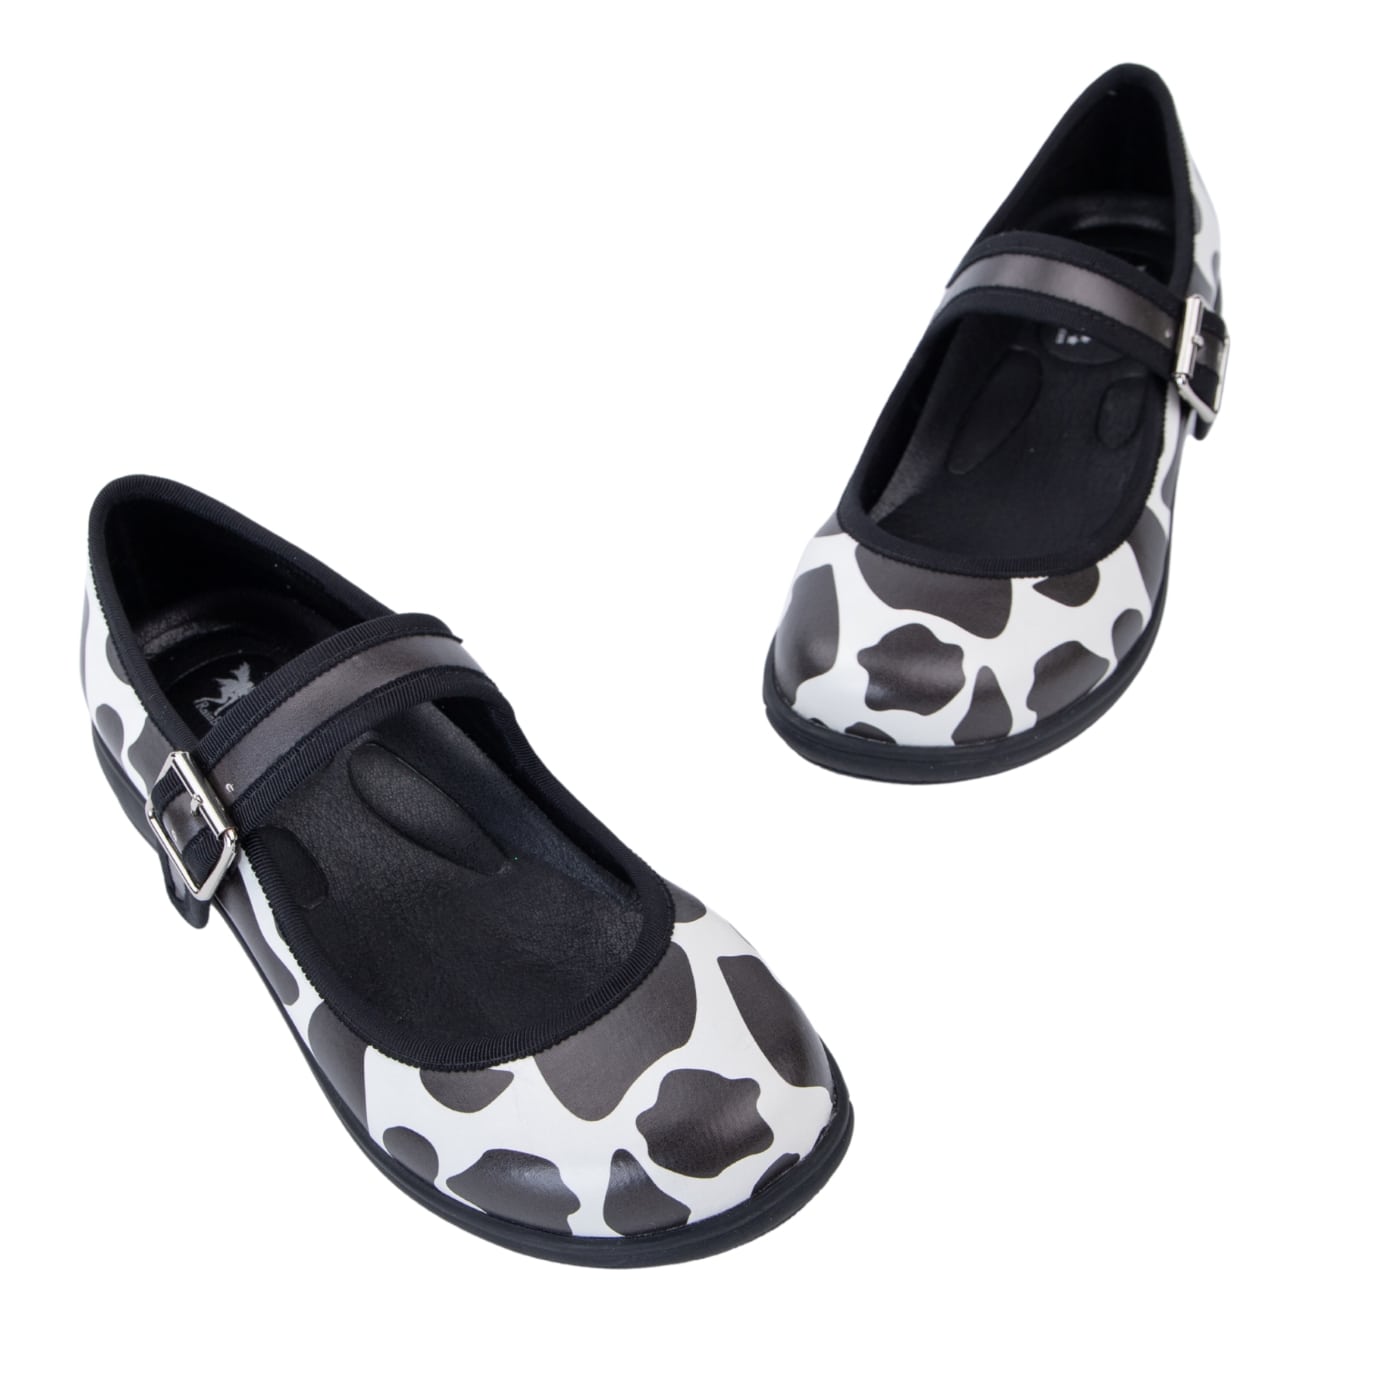 Udderly Quirky Mary Janes by RainbowsAndFairies.com.au (Cow Print - Mismatched Shoes - Glitter Shoes - Moo - Black & White) - SKU: FW_MARYJ_UDDER_ORG - Pic-01